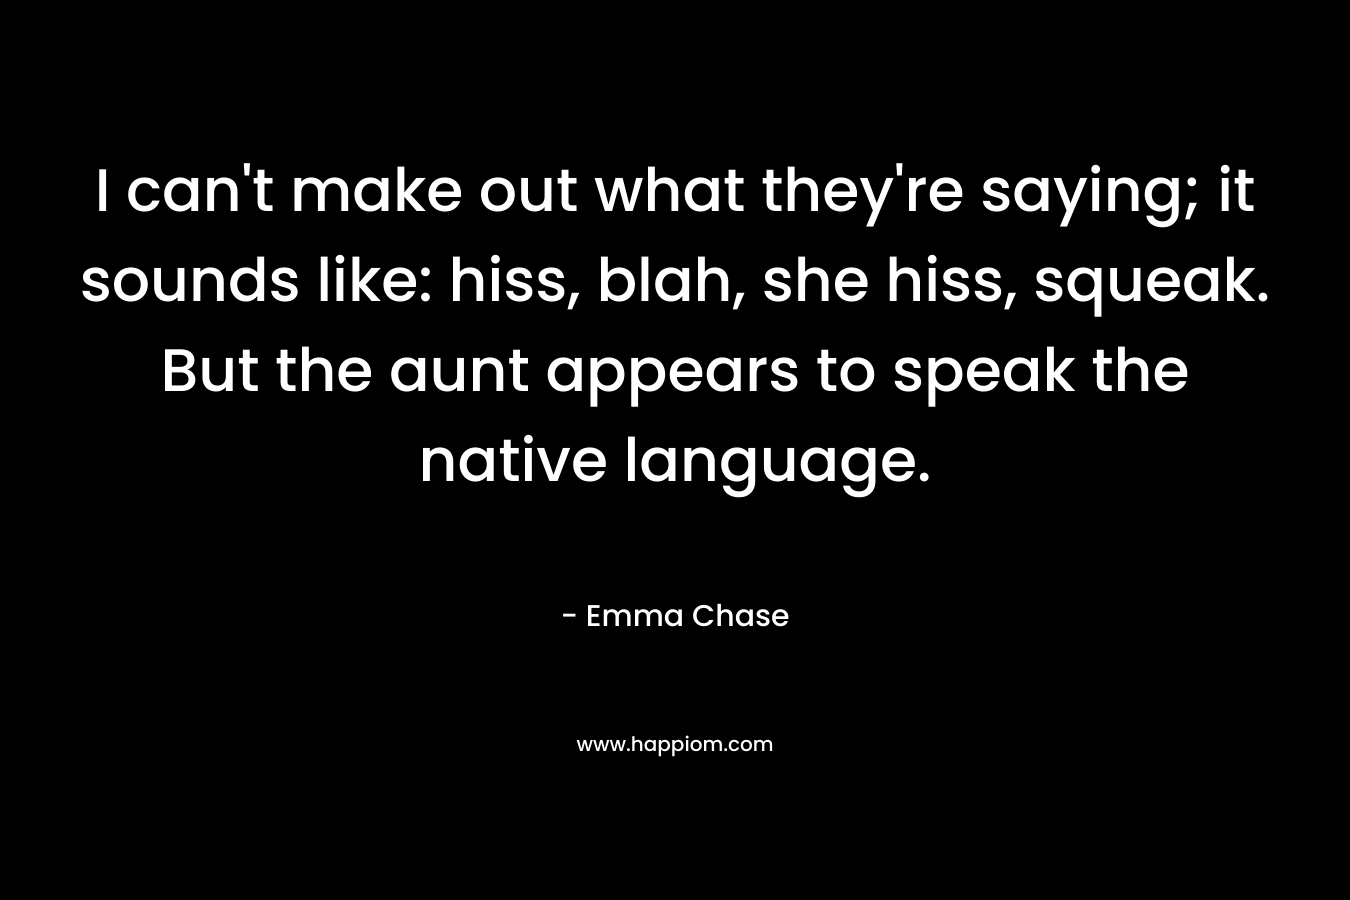 I can’t make out what they’re saying; it sounds like: hiss, blah, she hiss, squeak. But the aunt appears to speak the native language. – Emma Chase